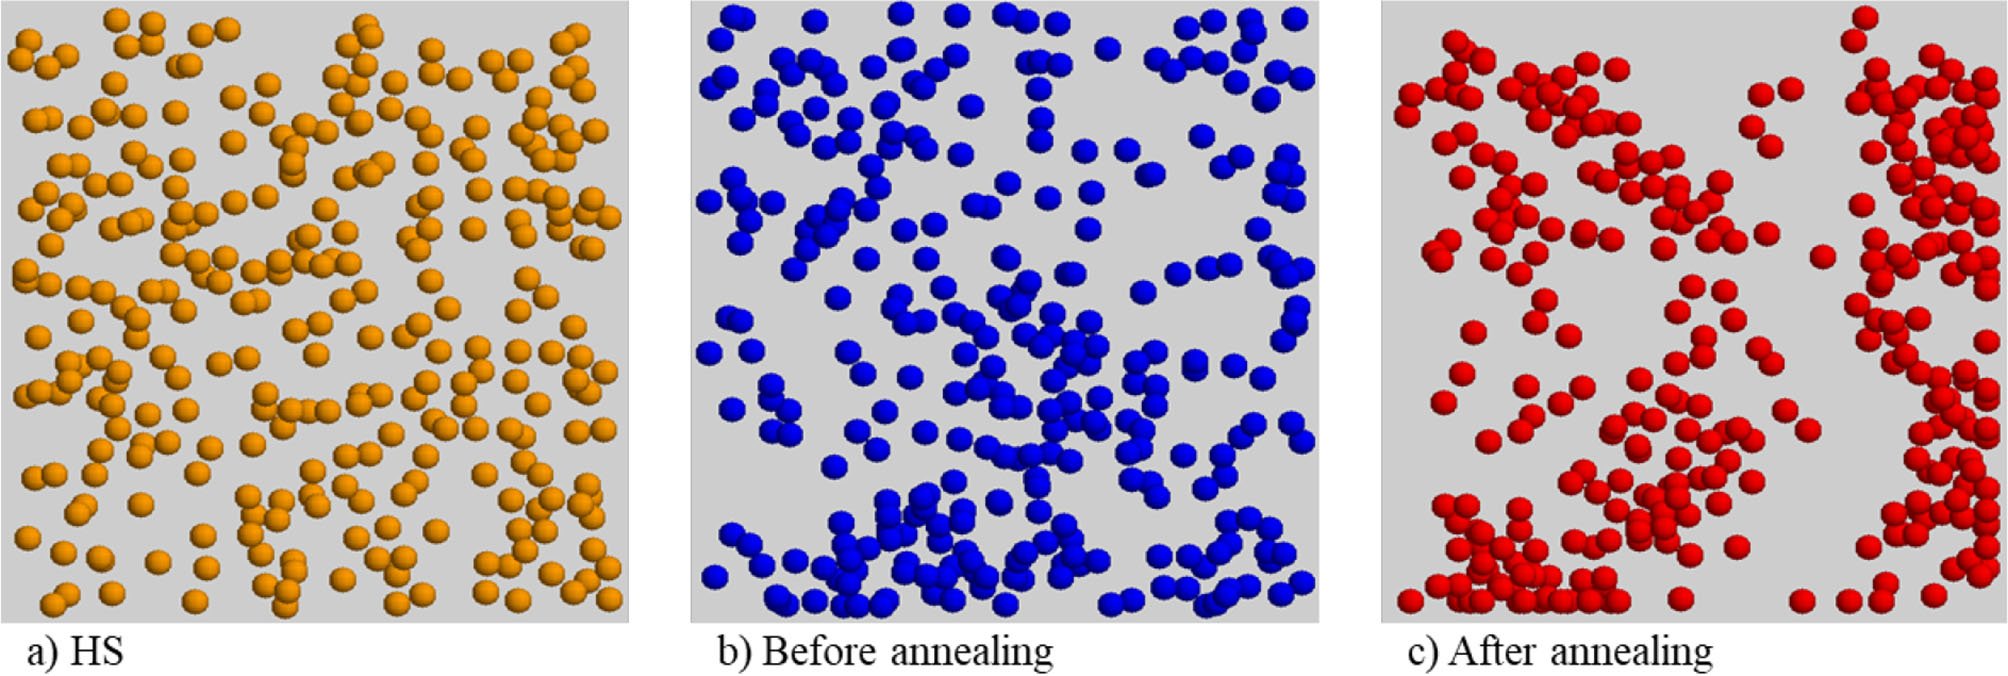 Simulating diversity in nanoparticle sizes